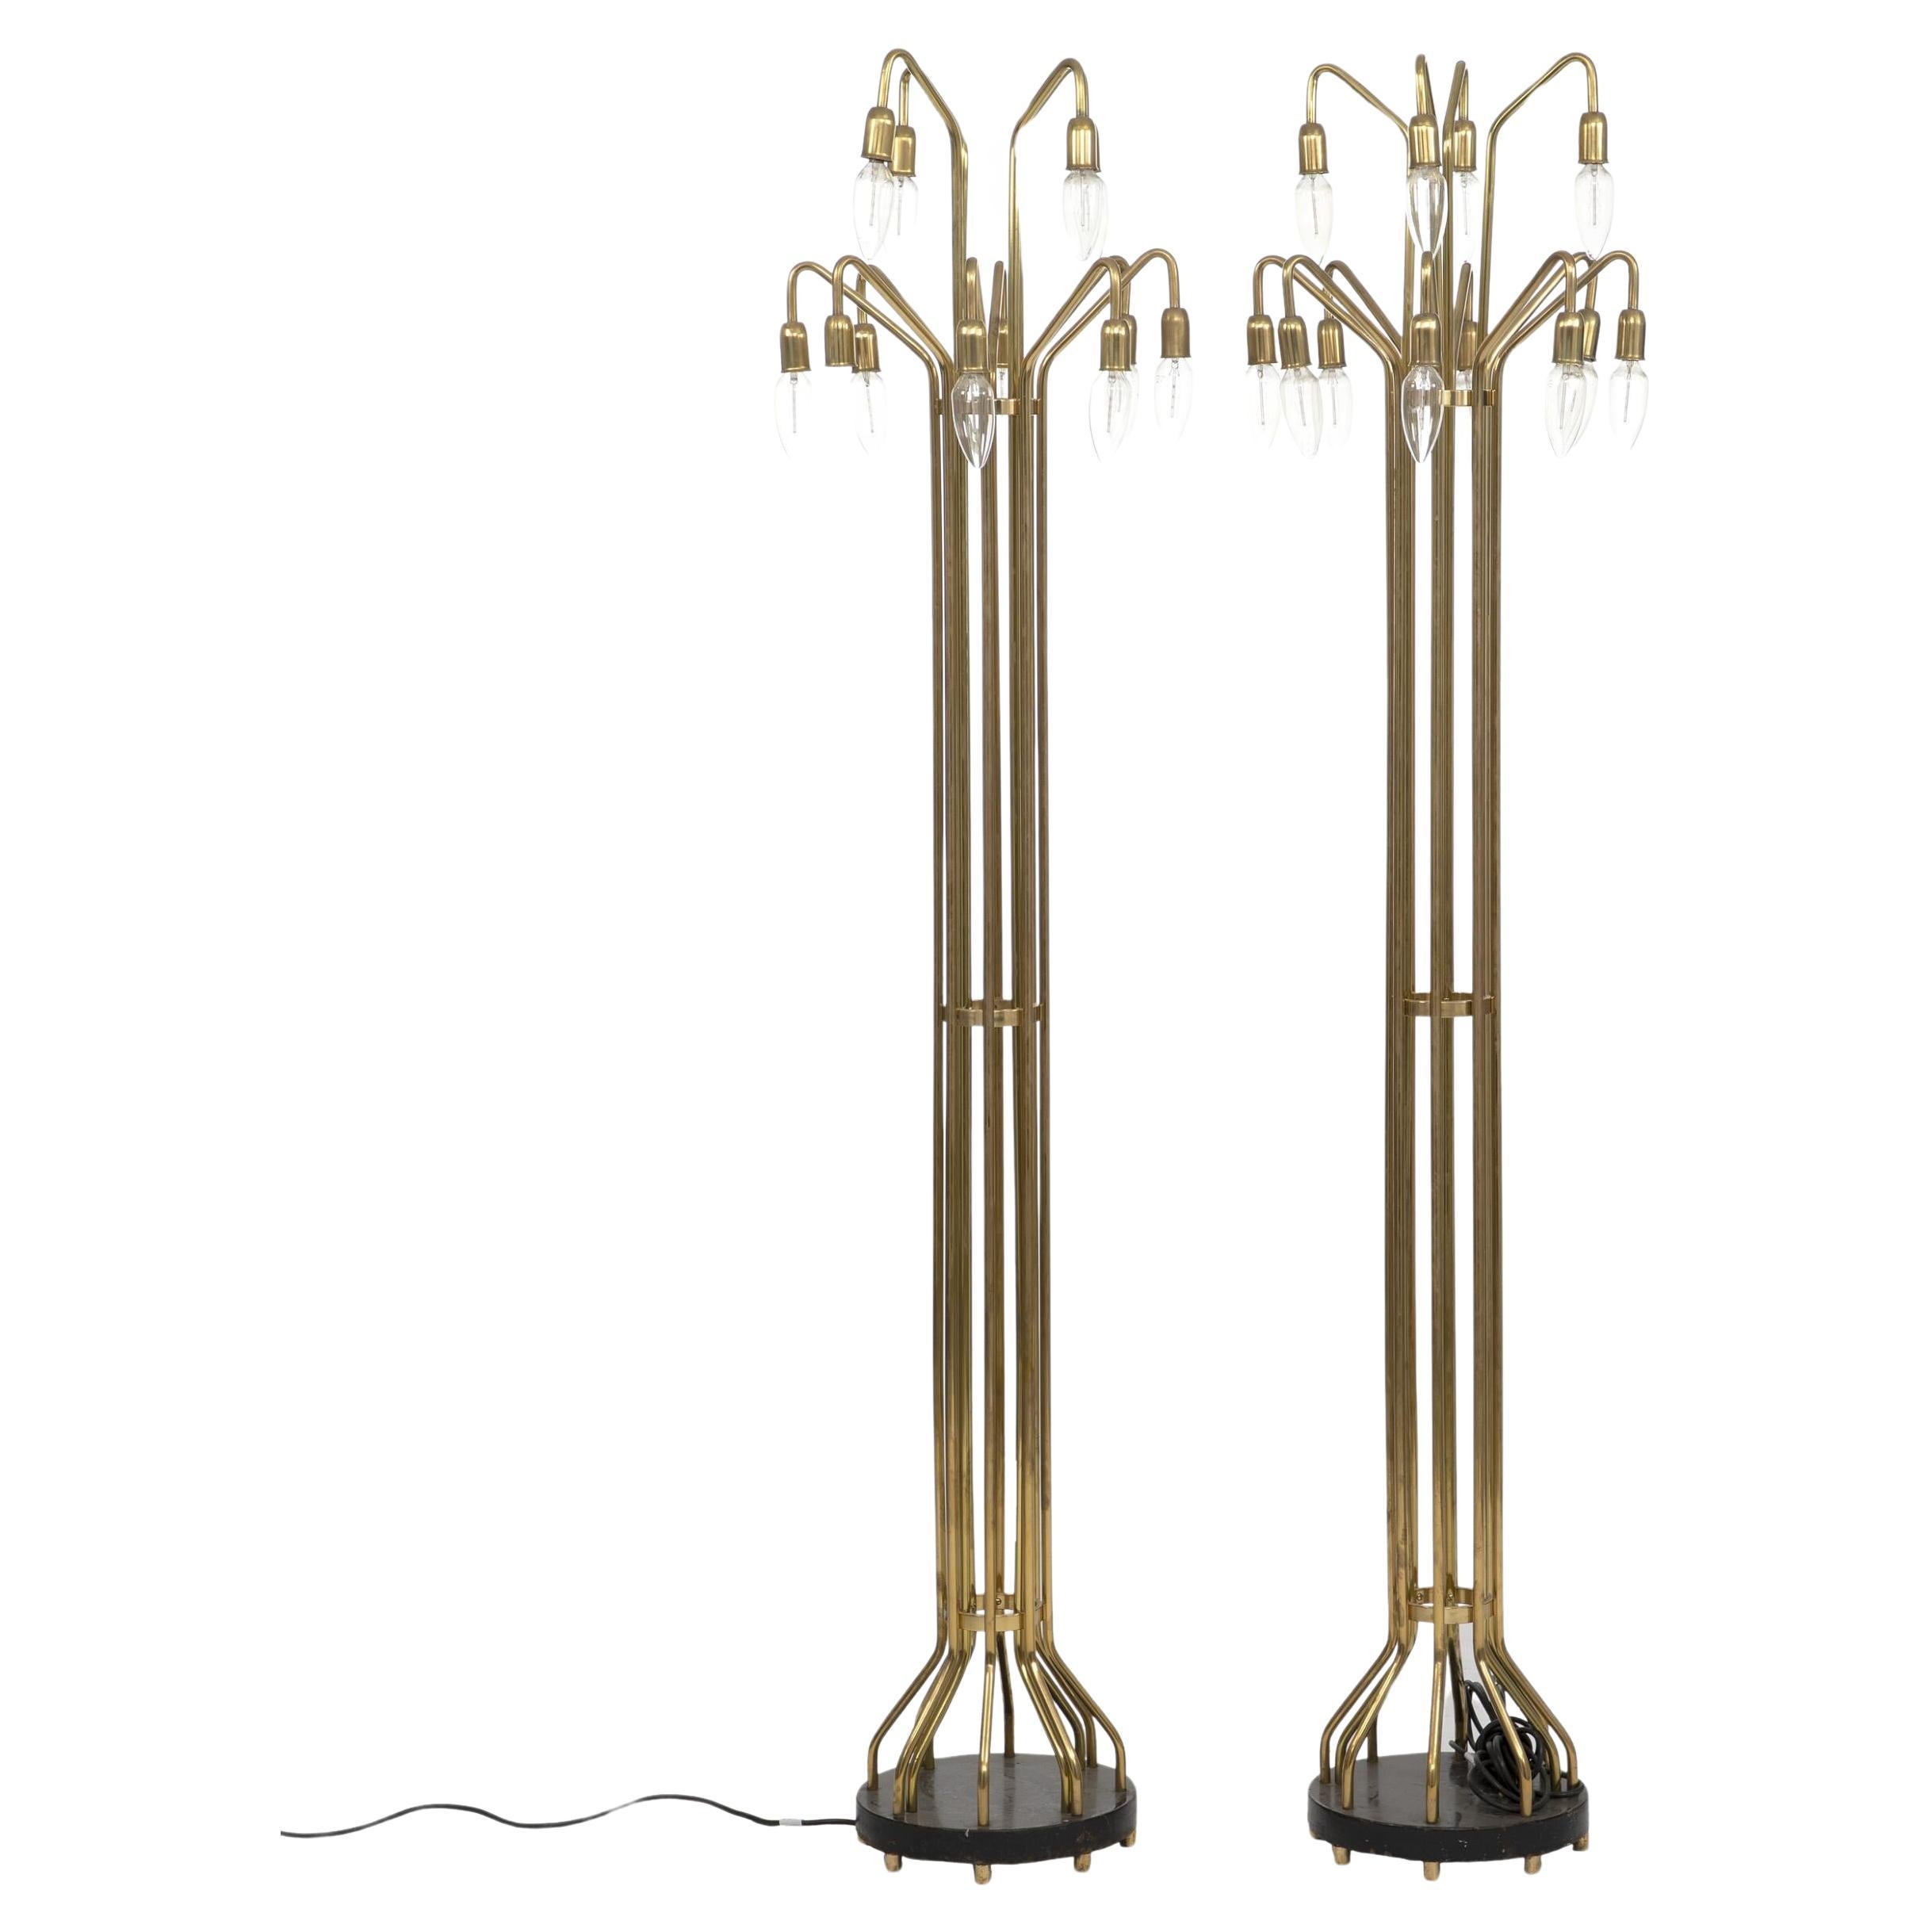 Pair of Midcentury Floor Lamps in Patinated Brass, Made in Denmark, 1950s For Sale